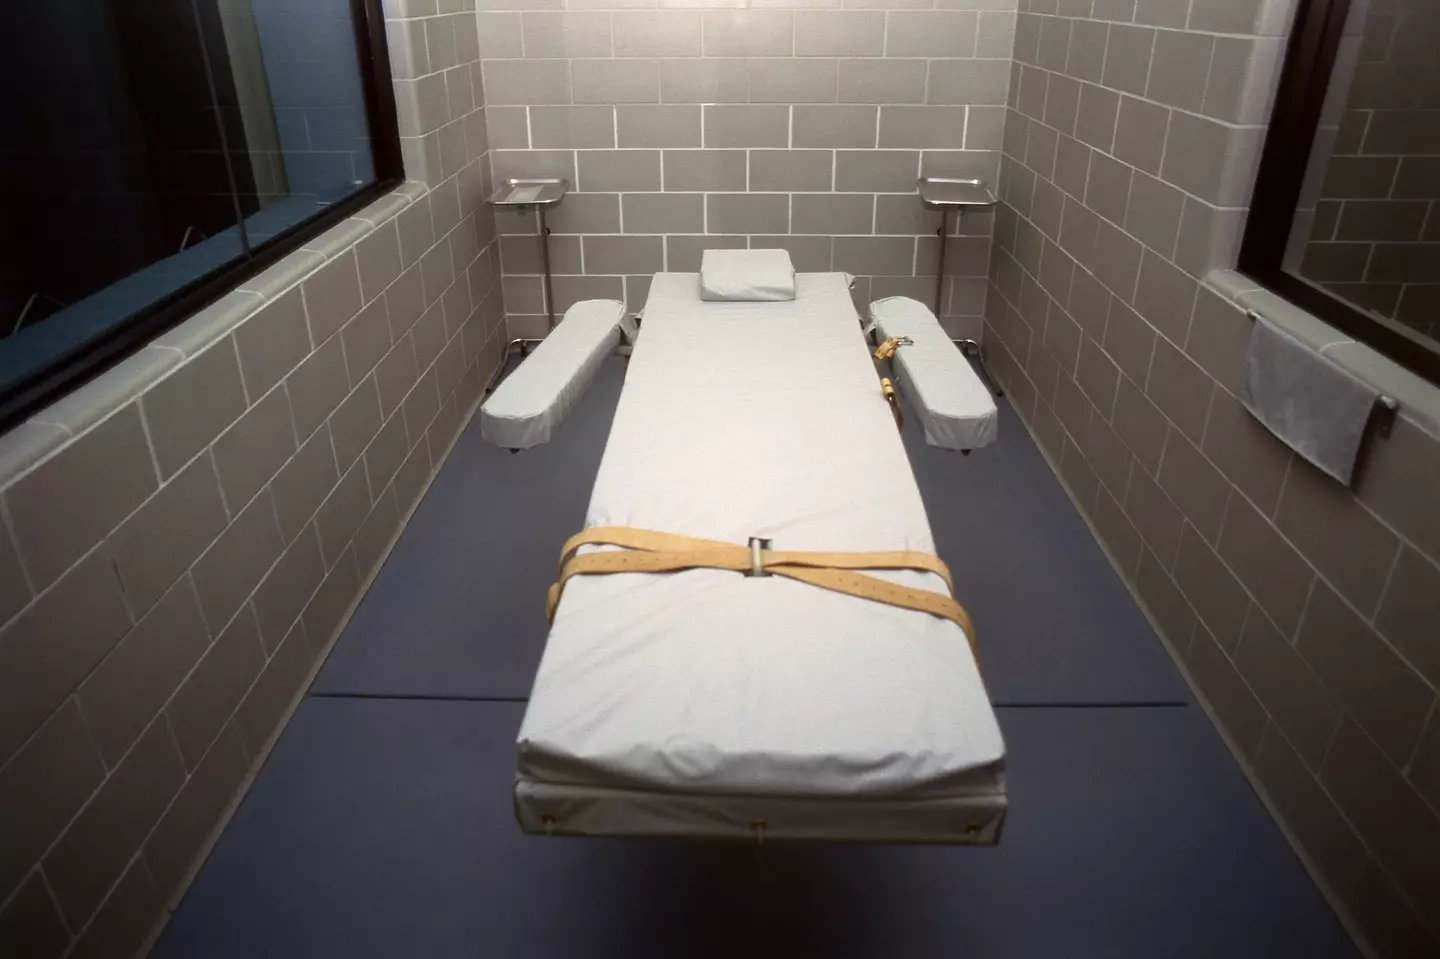 There is a debate about whether lethal injection is a humane method of execution.